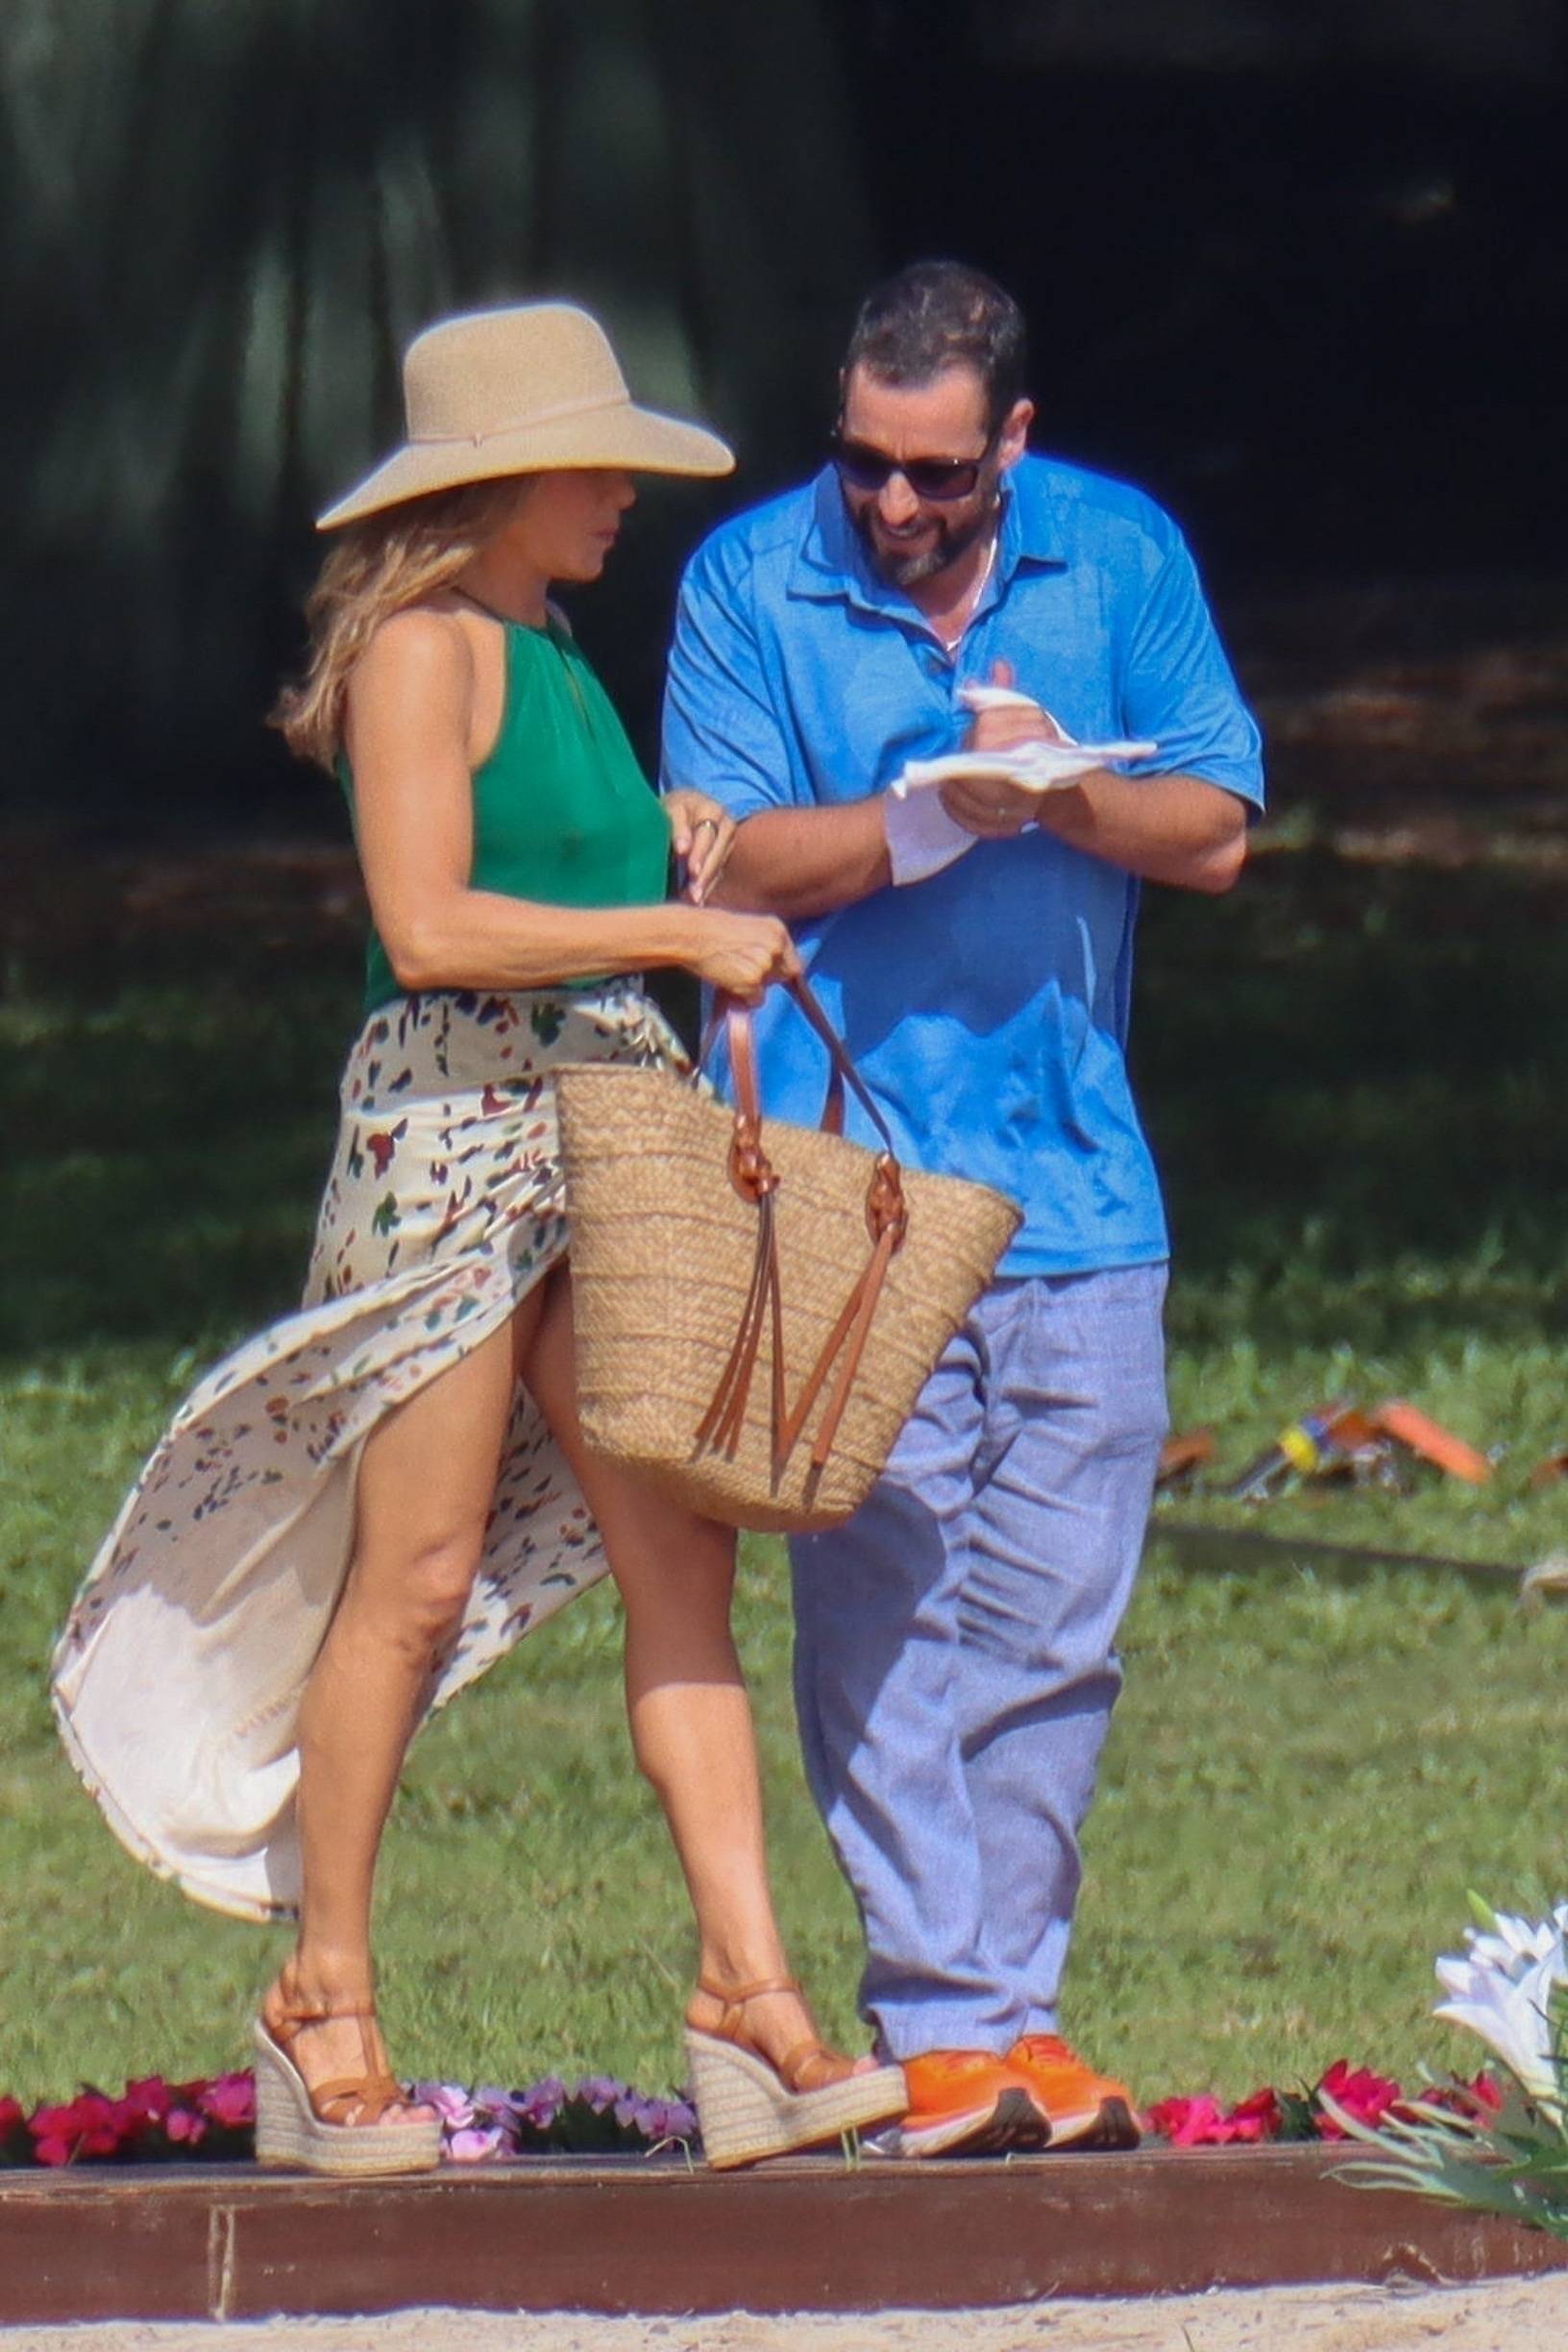 *PREMIUM-EXCLUSIVE* Jennifer Aniston and Adam Sandler spotted on set of Netflix's Murder Mystery 2 for the first time. **WEB EMBARGO UNTIL 3 pm ET on January 18,. 2022**